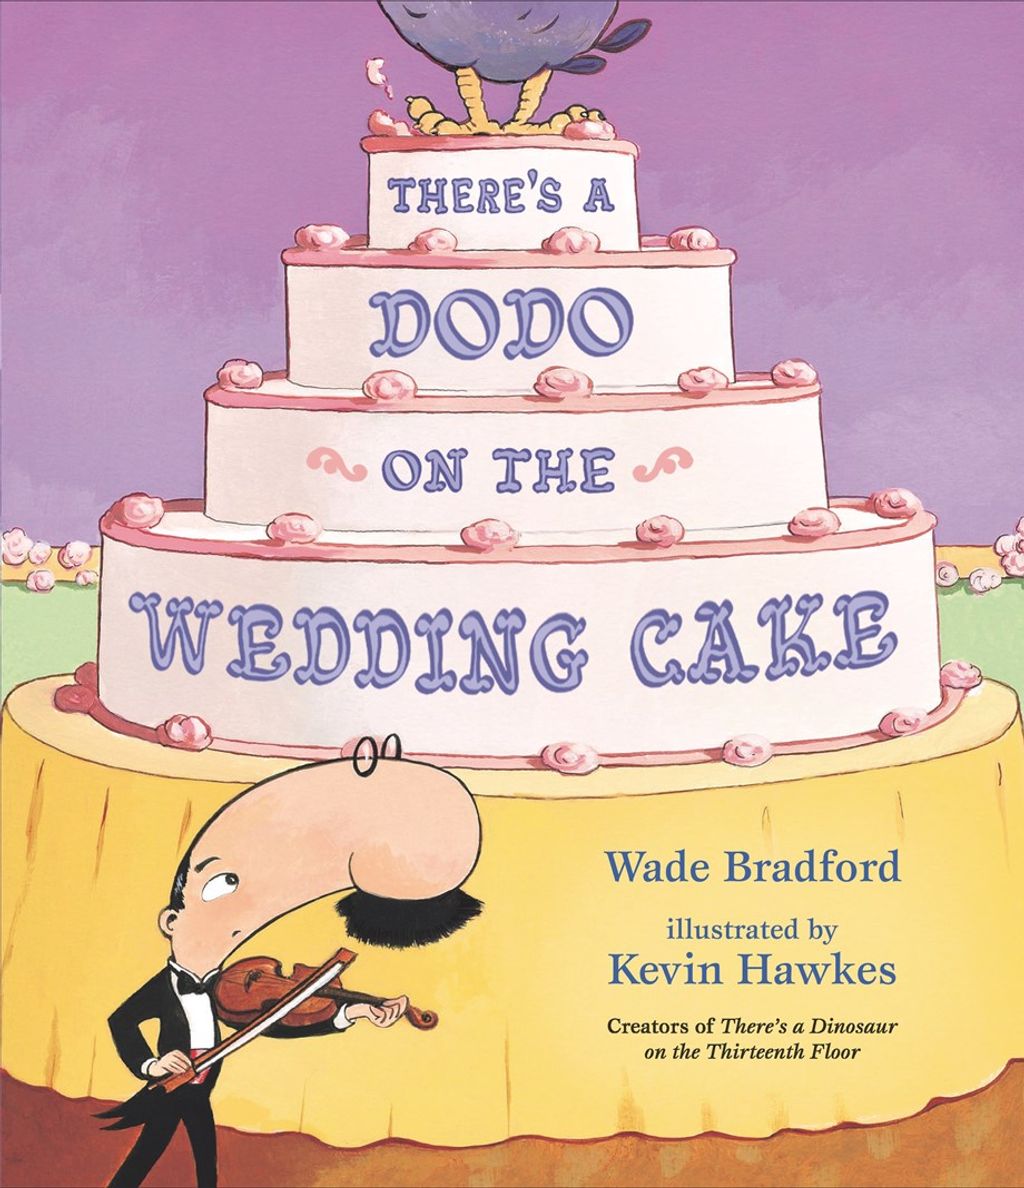 Book Cover of There's a Dodo on the Wedding Cake